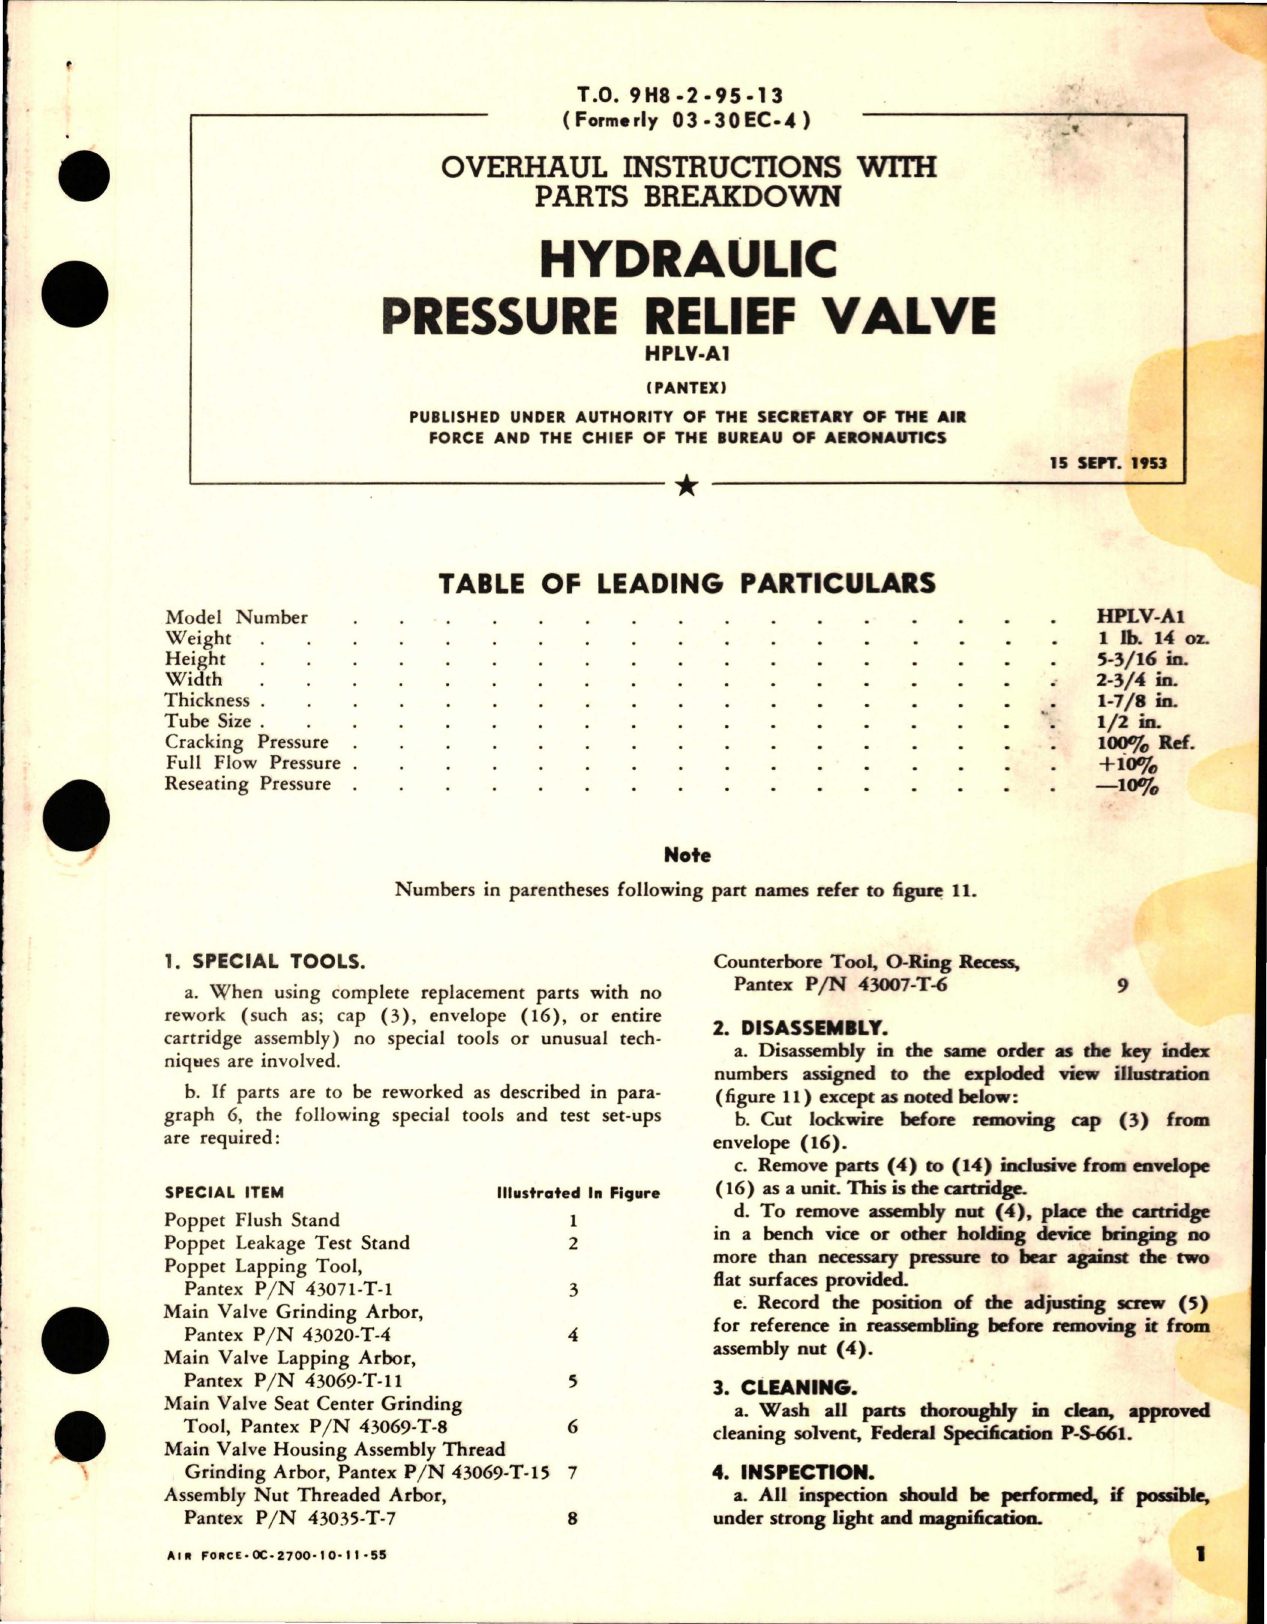 Sample page 1 from AirCorps Library document: Overhaul Instructions with Parts Breakdown for Hydraulic Pressure Relief Valve - HPLV-A1